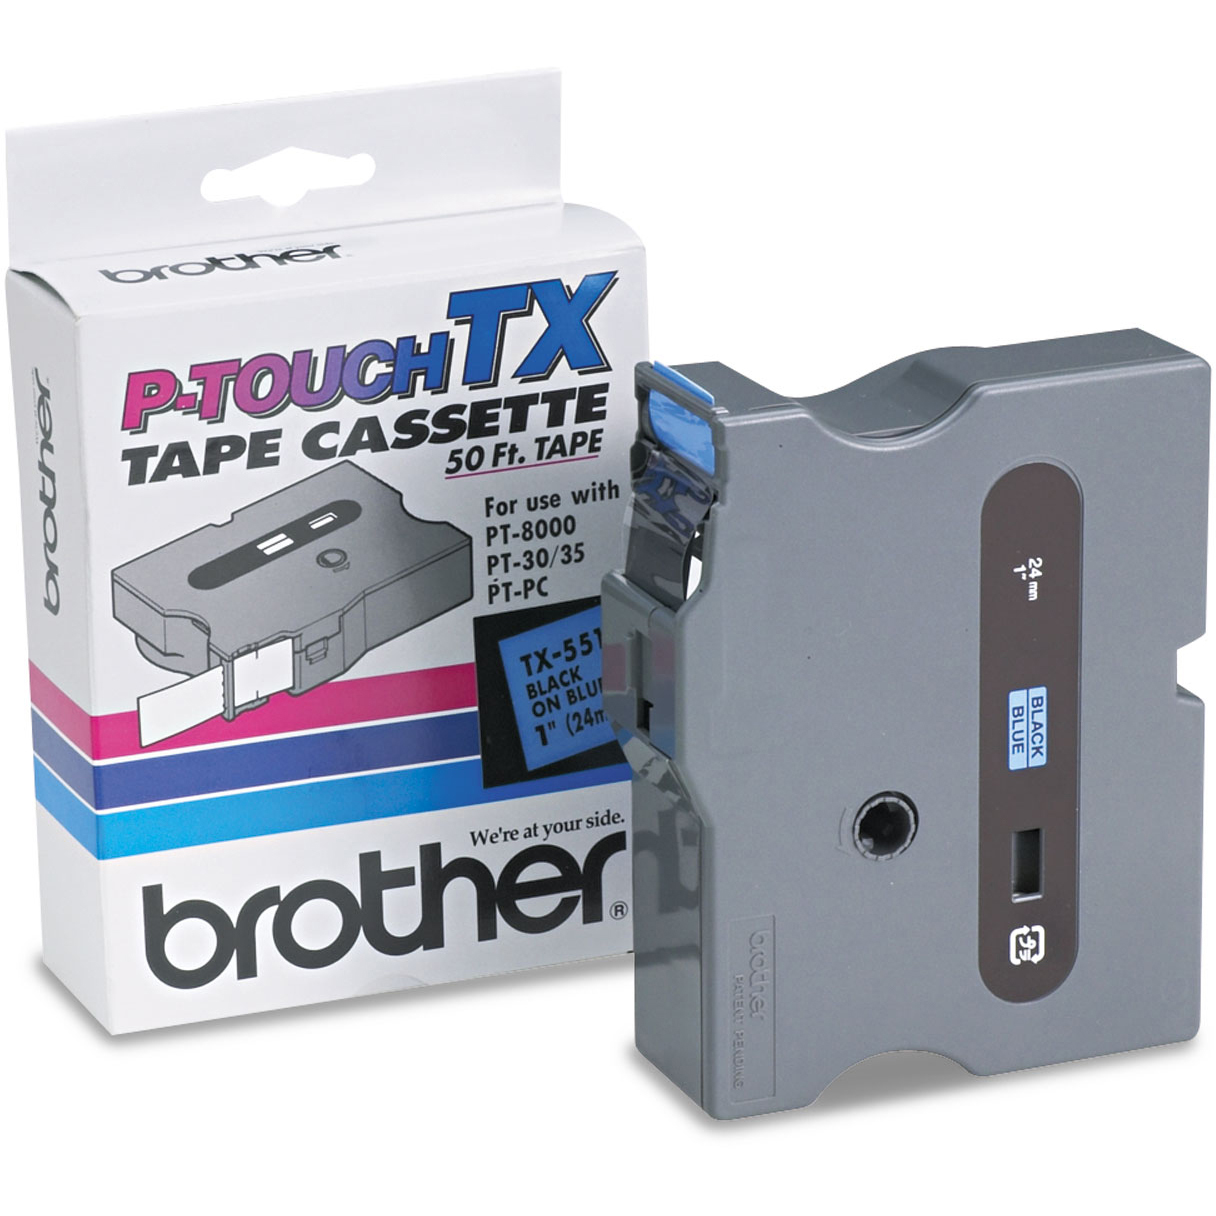 Original Brother TX-551 Black On Blue 24mm x 15m Laminated P-Touch Label Tape (TX551)